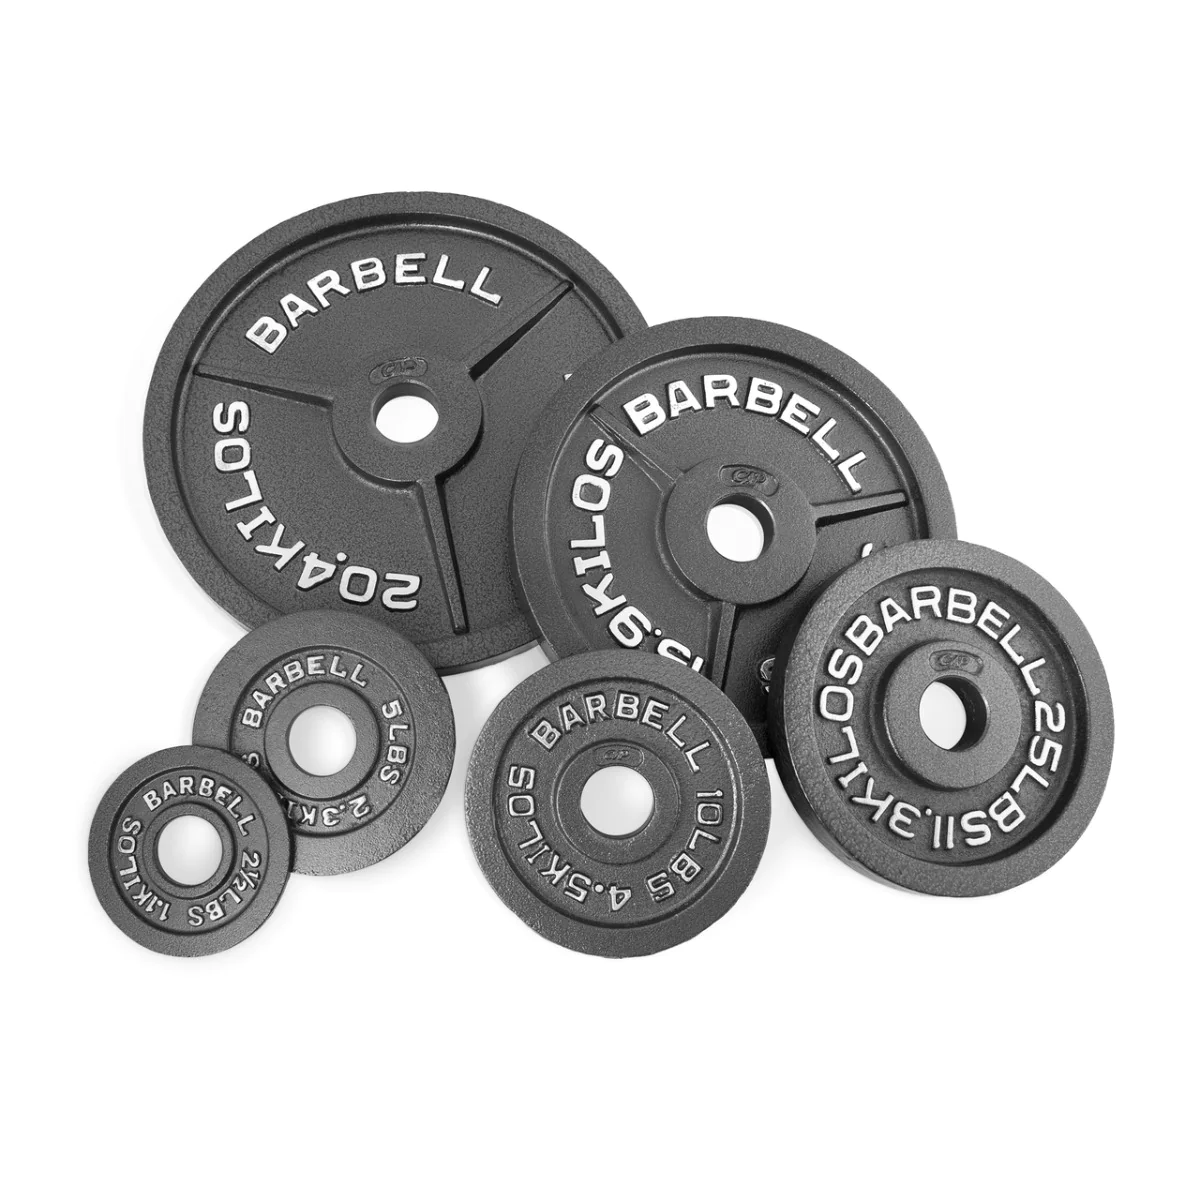 Detail Cap Barbell 1 Hole Weight Lifting Plates Nomer 19